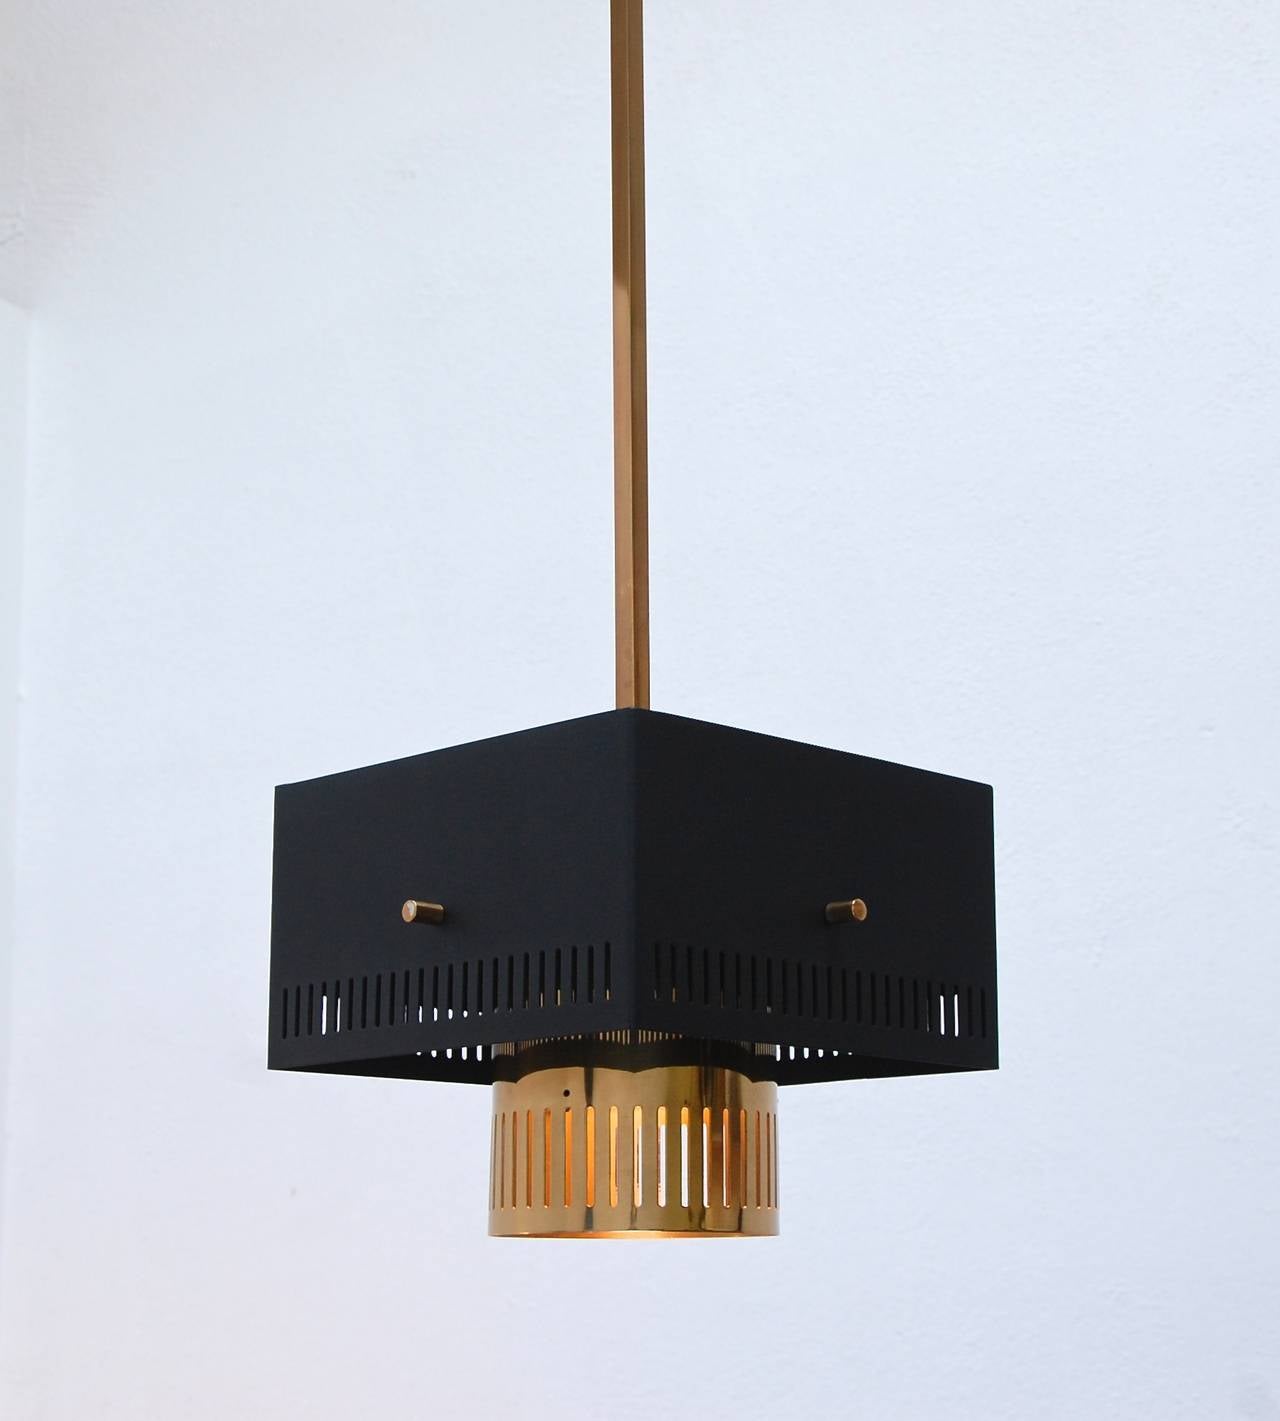 Sharp cubic steel and brass pendants from Italy with perforated shades and glass diffusers.

Drop: 46